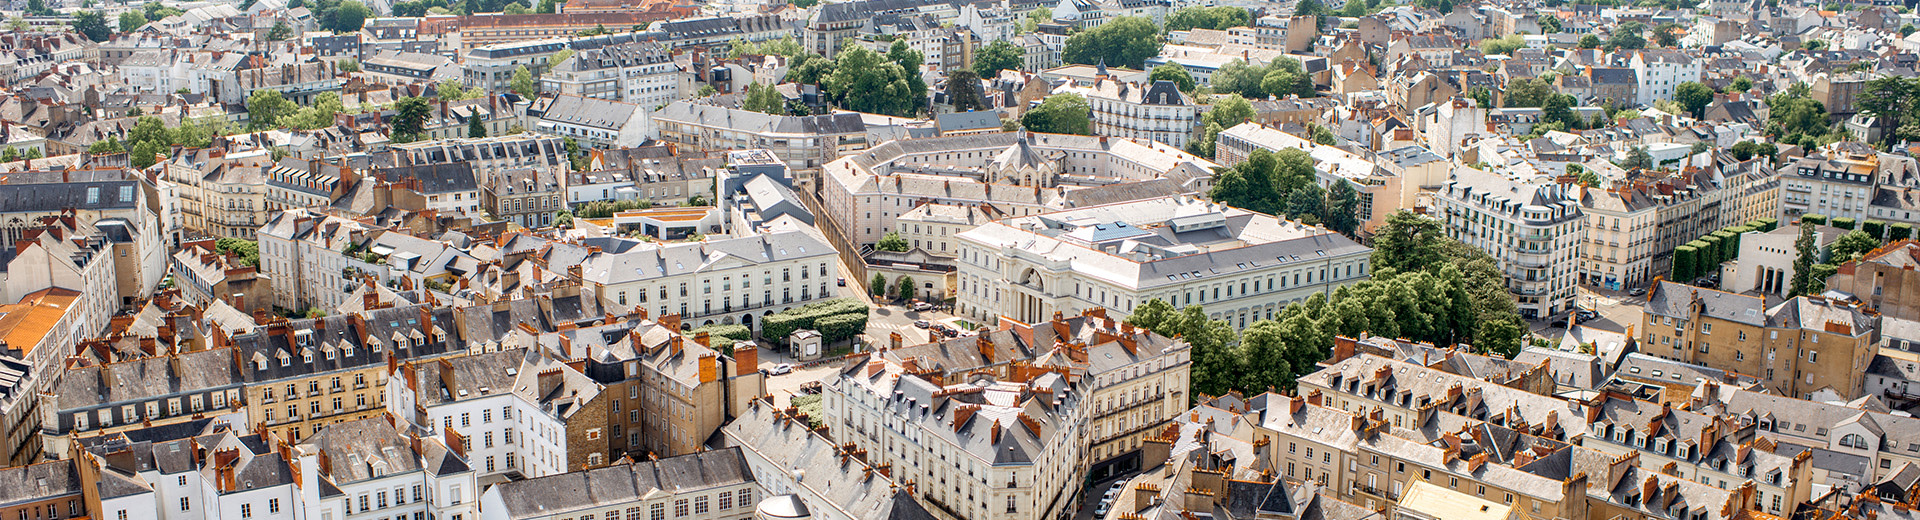 A bright, daytime picture looking down on streets and buildings in Nantes. Green trees nestle among nineteenth-century buildings.